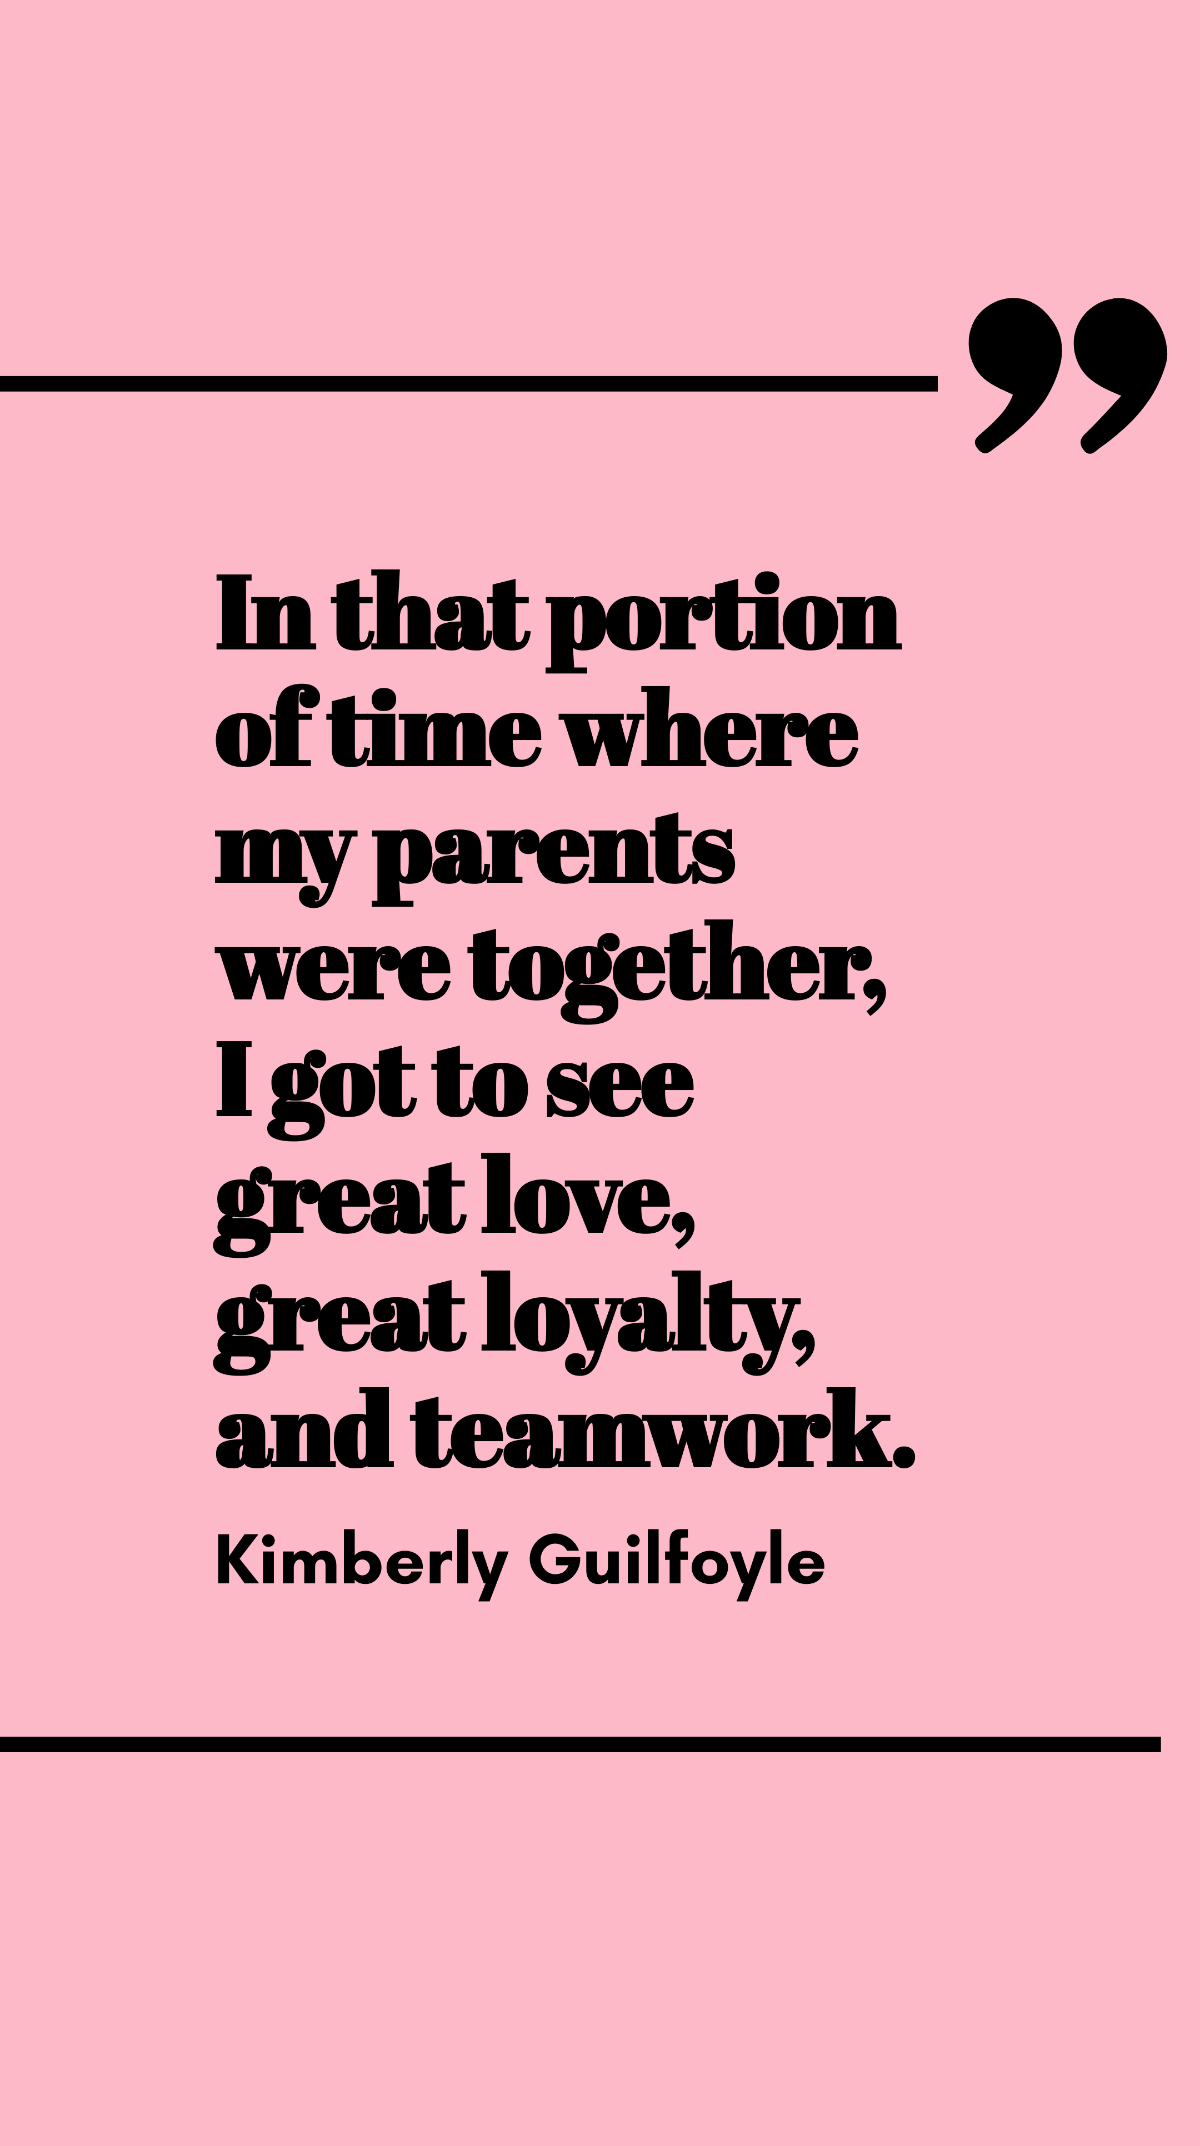 Kimberly Guilfoyle - In that portion of time where my parents were together, I got to see great love, great loyalty, and teamwork. Template